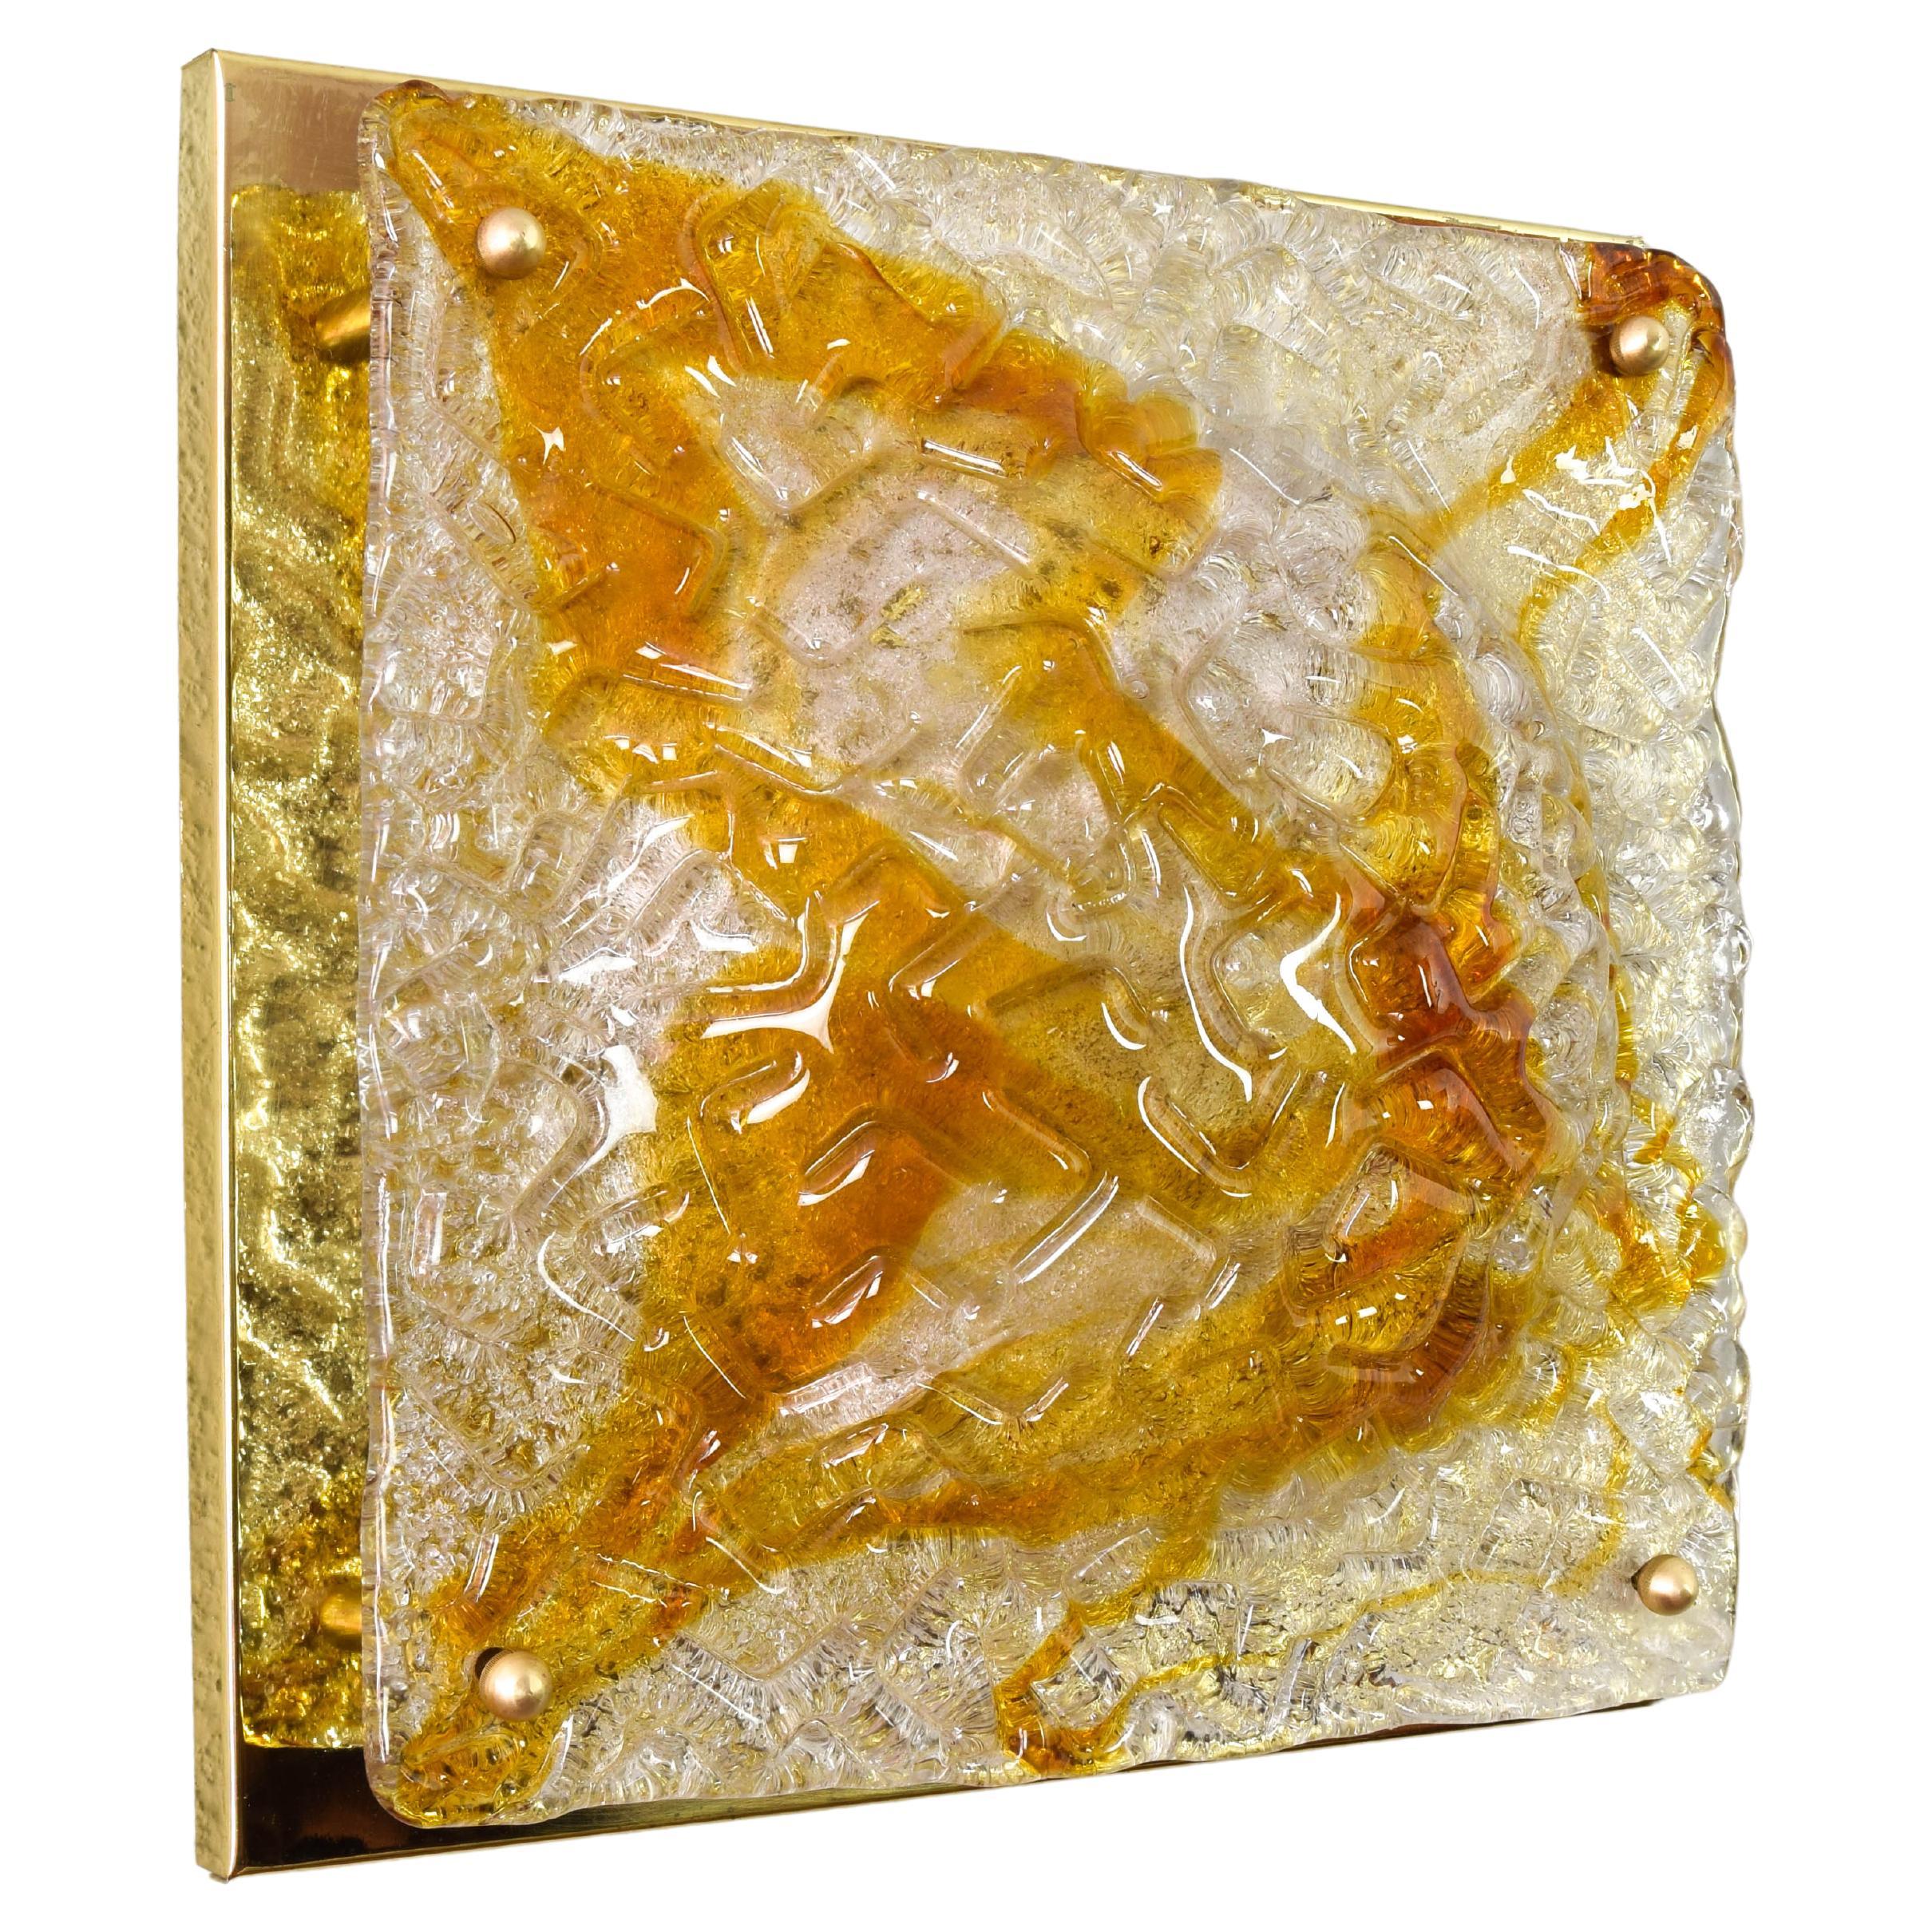 Stunning Murano glass Flushmount in relief on brass plate produced by Mazzega in Italy in the 1960's.
The large Murano glass plate in a clear and amber caramel color is very thick and presents relief and markings that give an effect of warm light